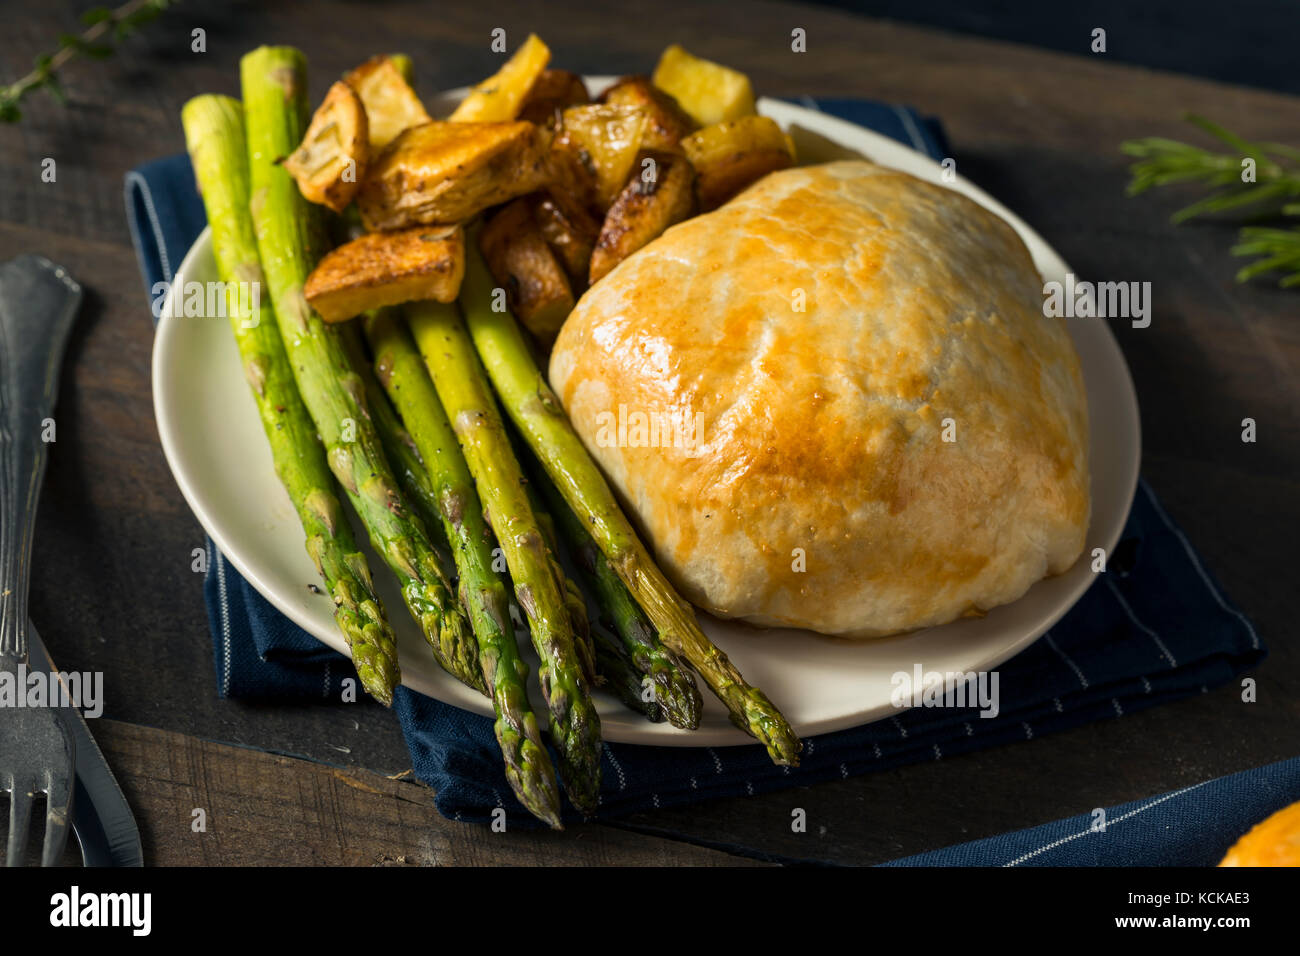 Homemade Gourmet Individual Beef Wellington Ready to Eat Stock Photo